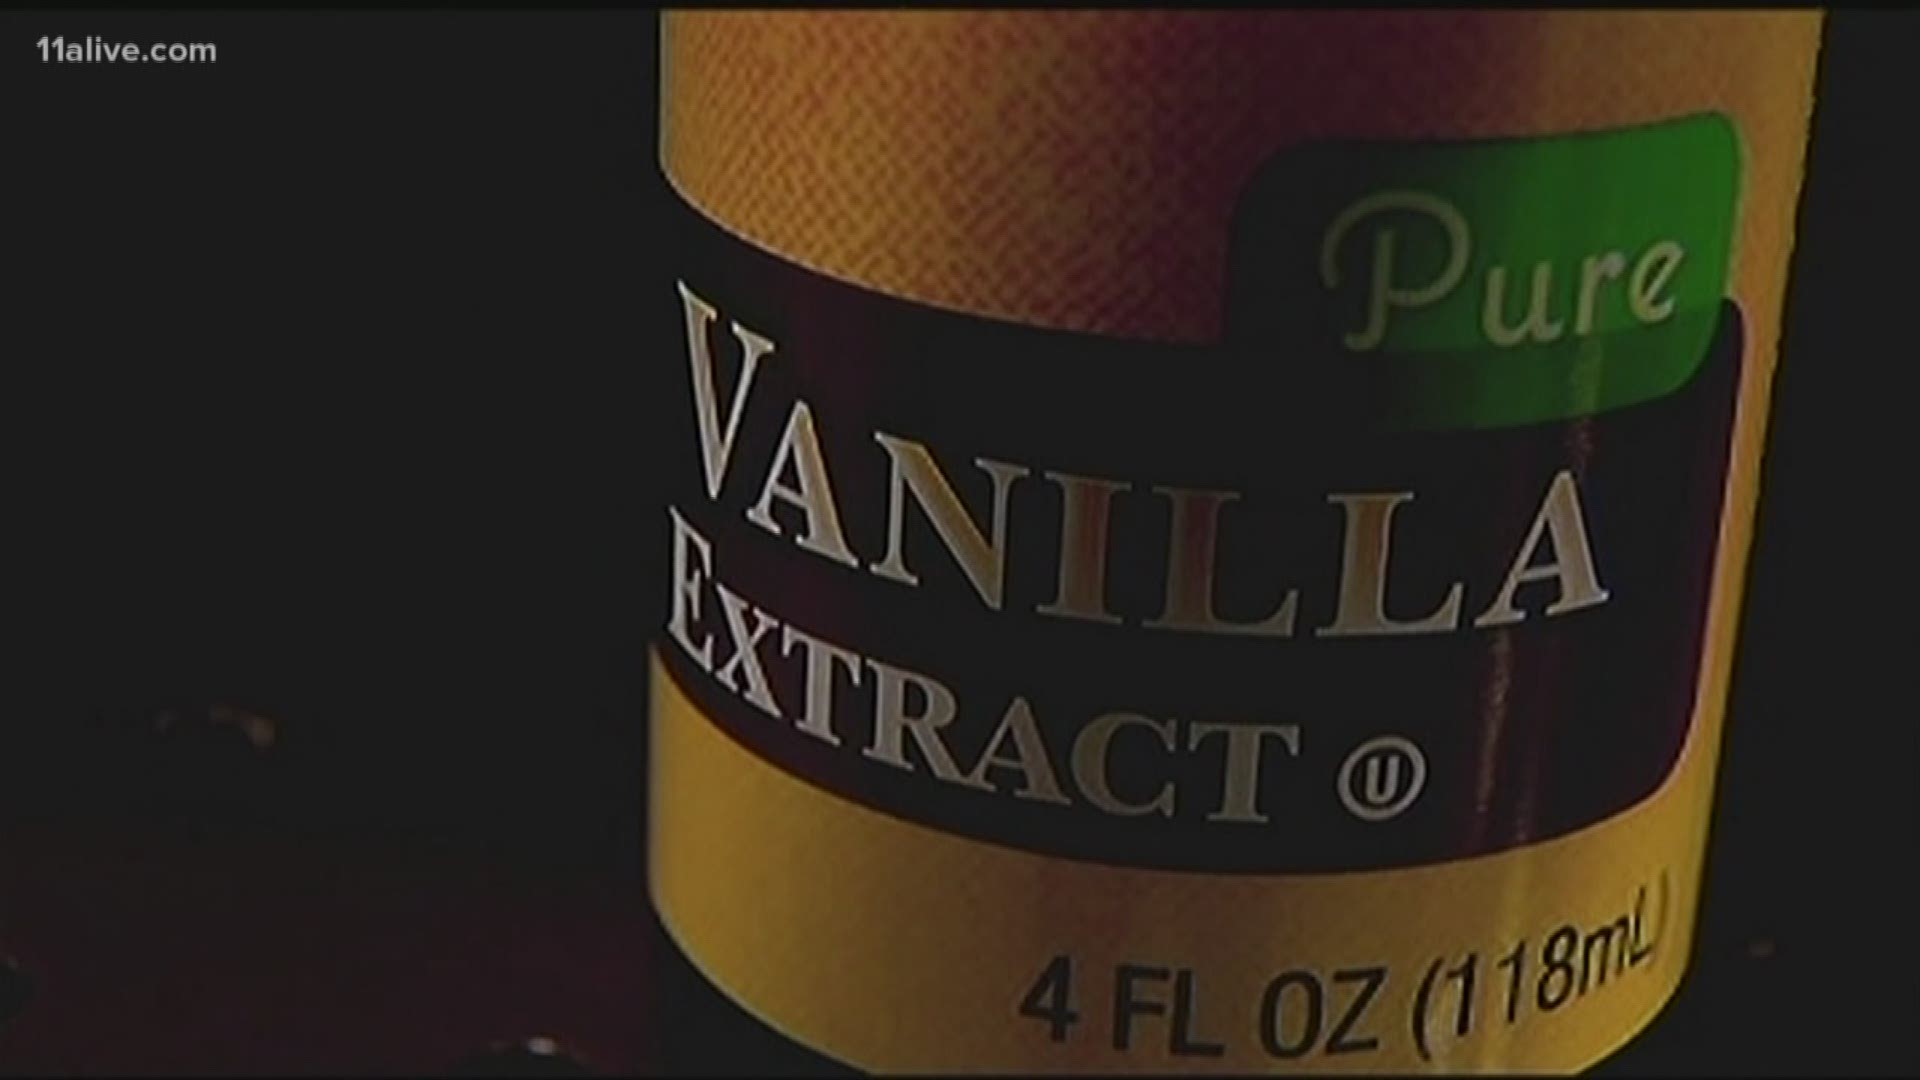 School officials said that a few Grady students were caught getting drunk off vanilla extract this week. The teens bough the flavoring at a store close to the school and poured it in their coffee, Atlanta school officials said.